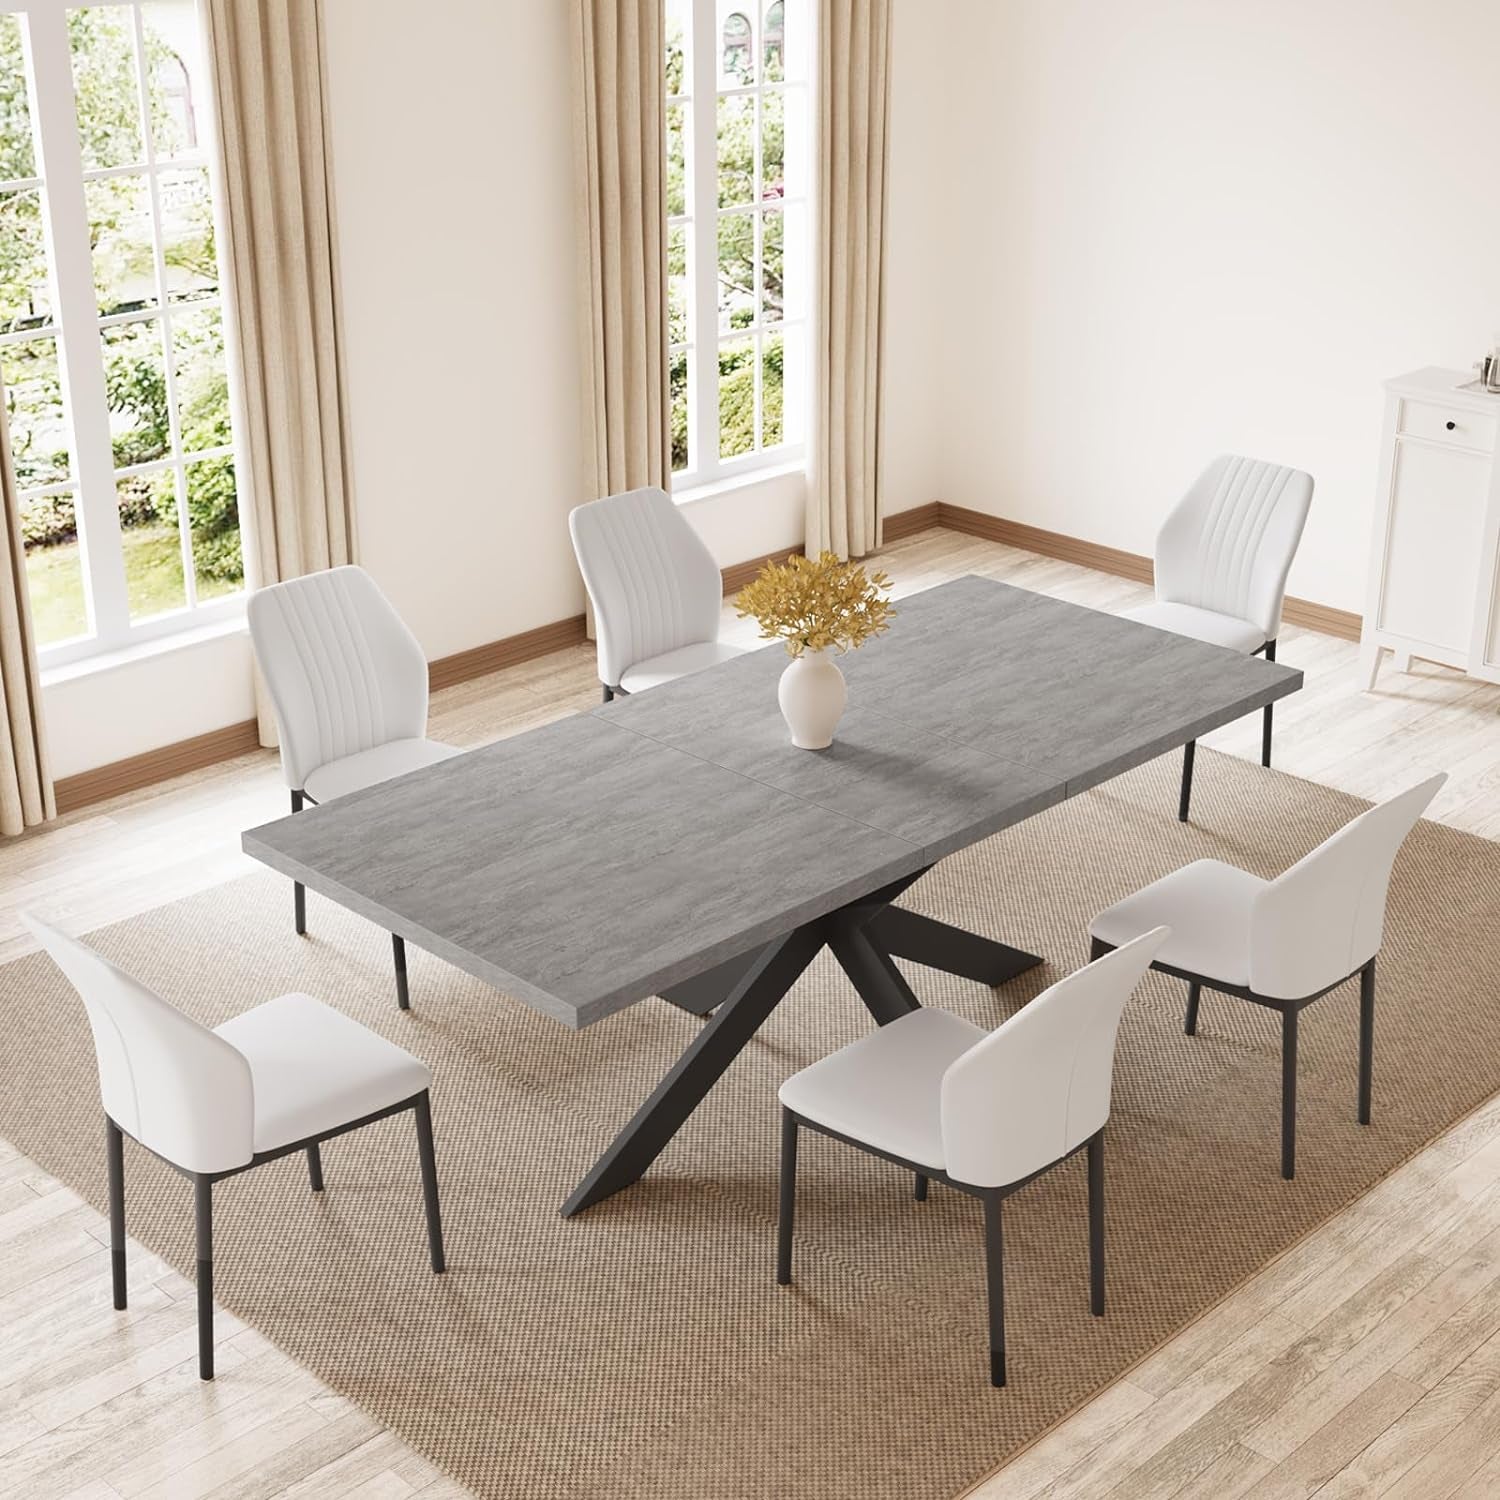 6-8 People Modern Dining Table Rectangular Kitchen Dining Table Space-Saving Expandable Dining Table Metal Frame (Gray Table + 6 White Chairs)